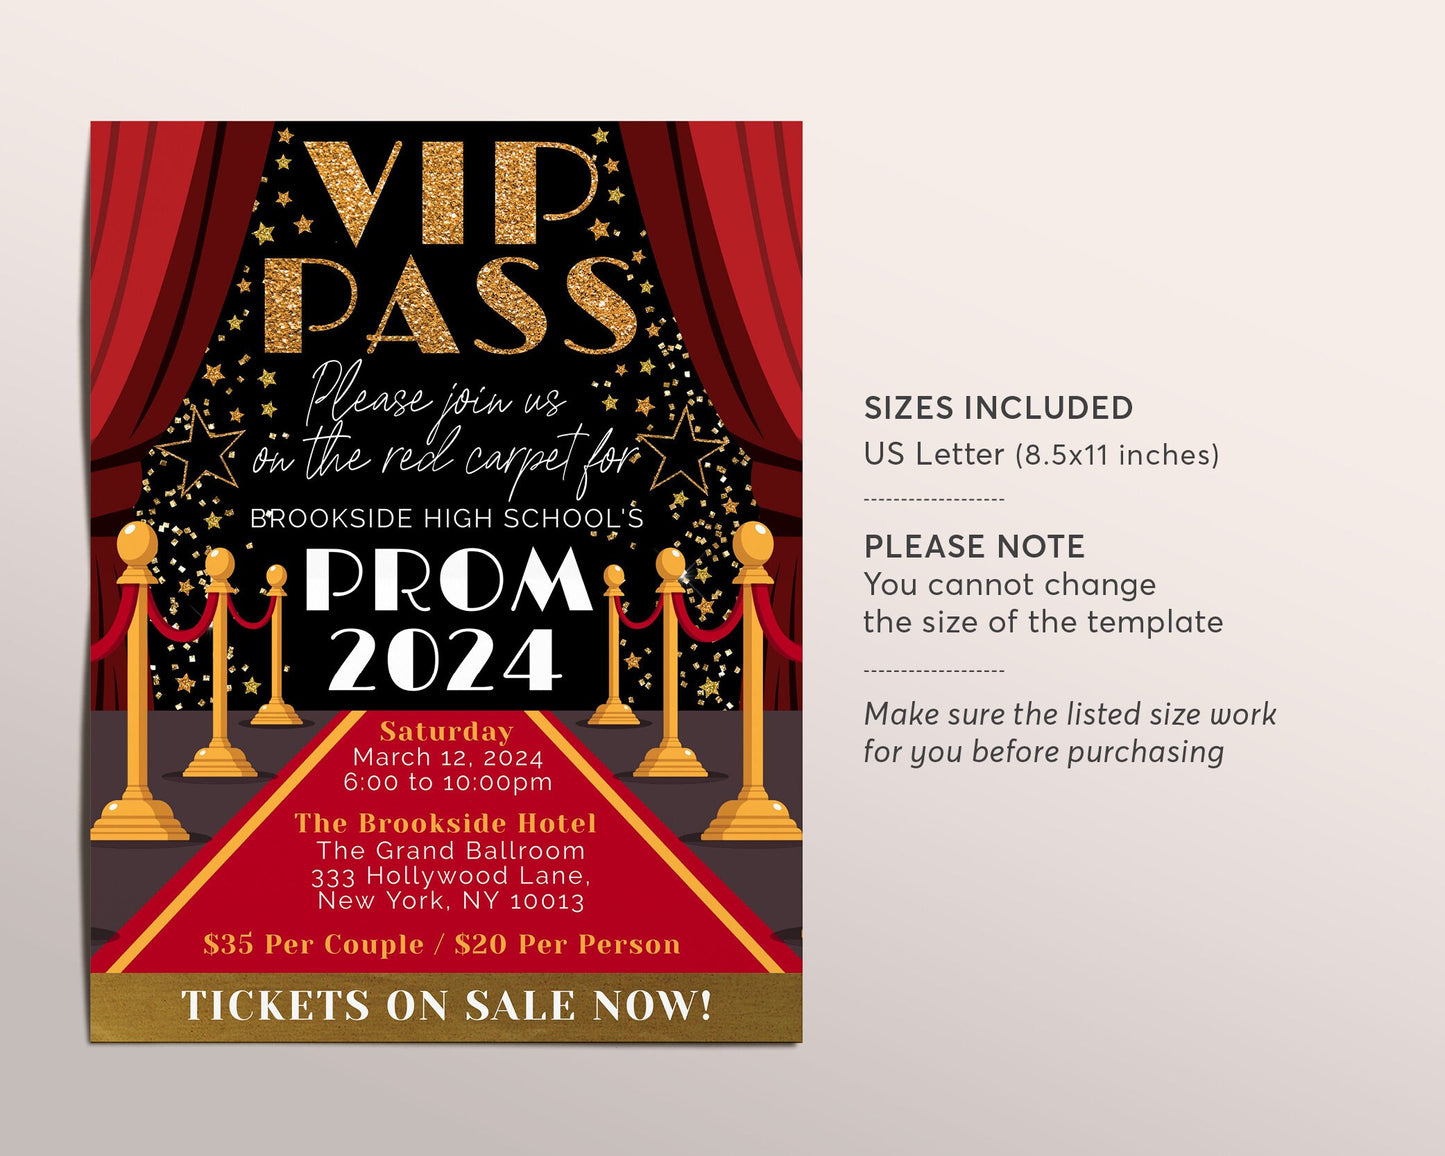 VIP Pass Prom Night Prom Dance Flyer Editable Template, Junior Senior Red Carpet Homecoming Hollywood Access Invitation Father Daughter Gala